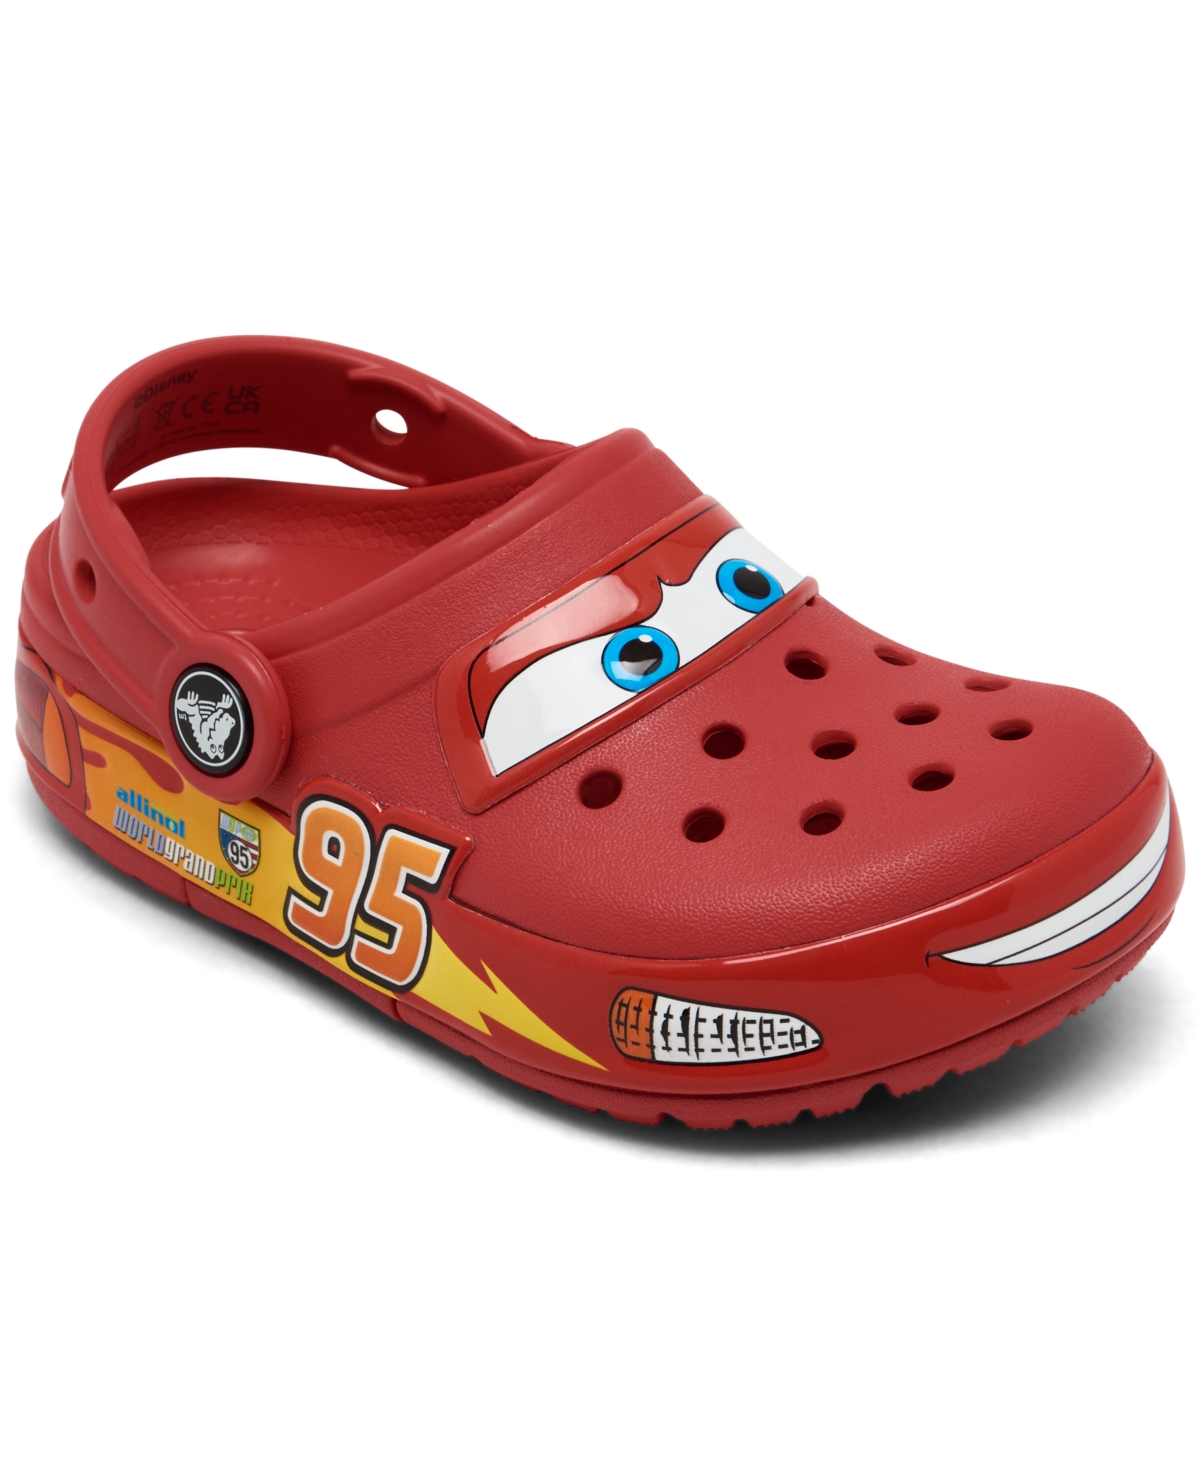 Crocs Toddler Kids Lightning Mcqueen Crocband Clogs From Finish Line In Red